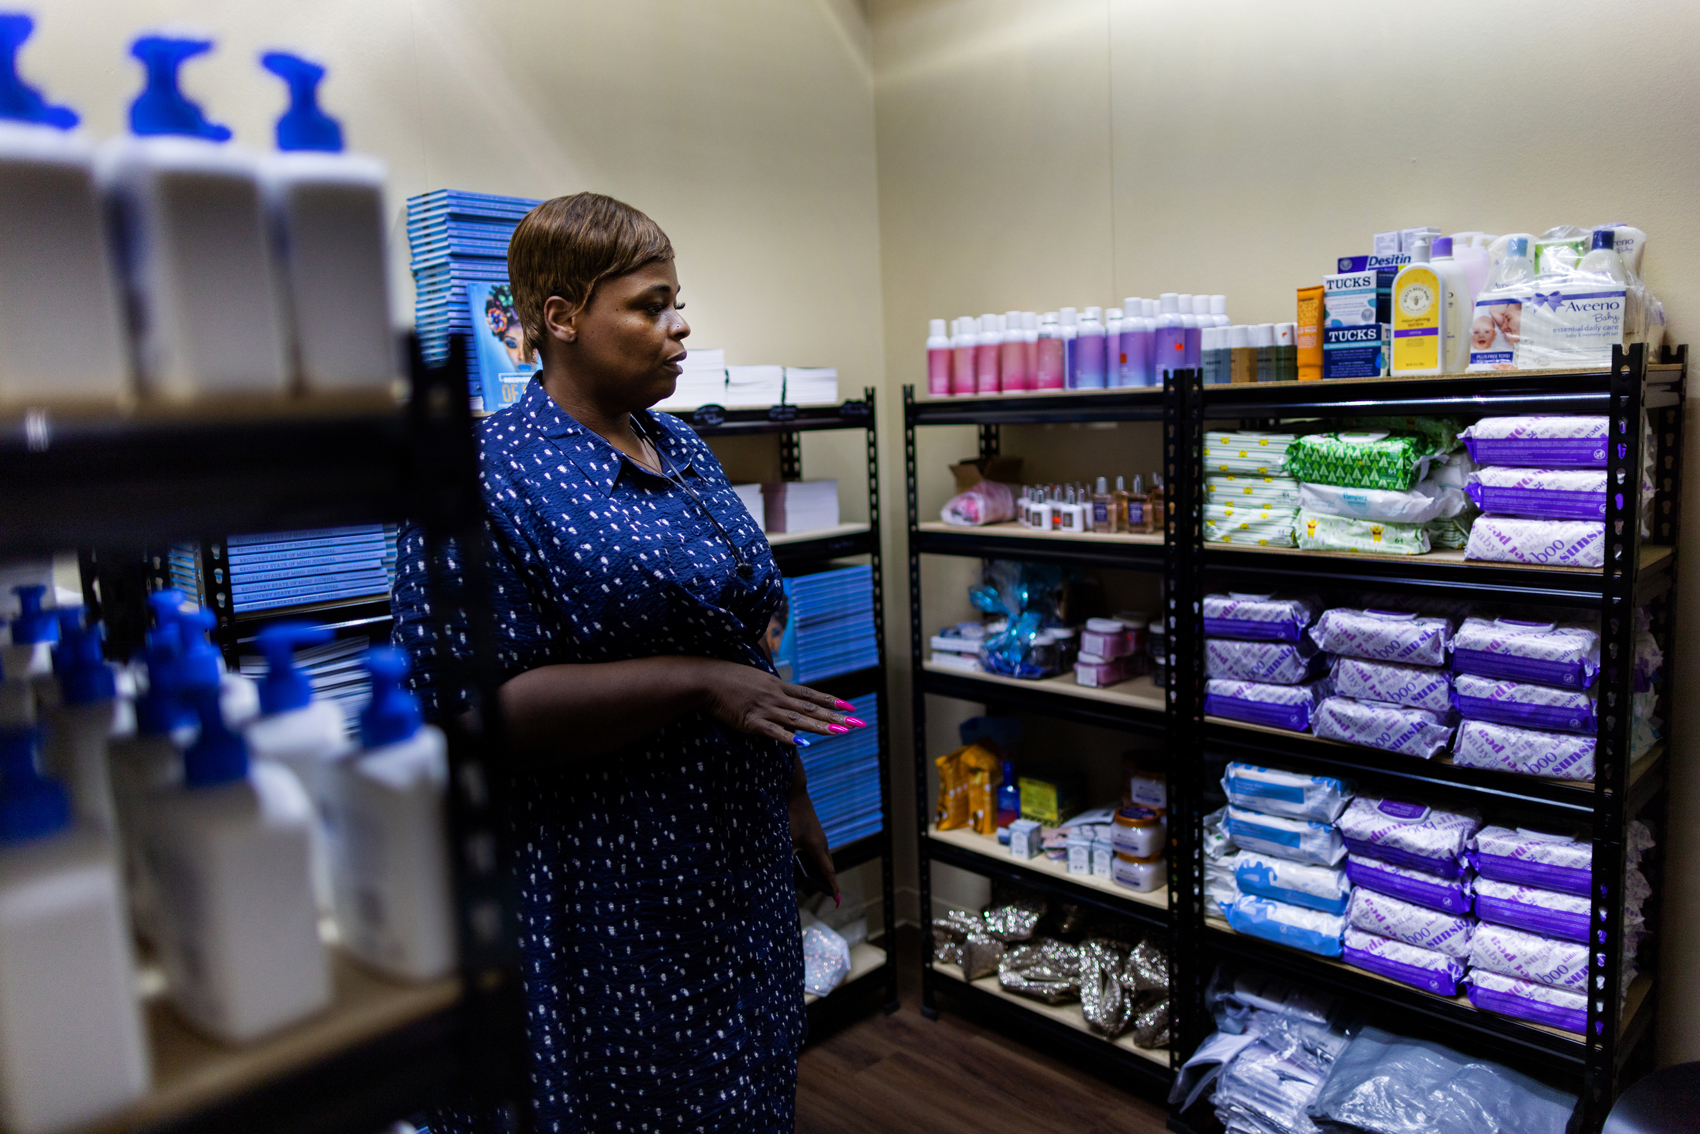 Kay Matthews, the executive director and founder of Shades of Blue, a maternal mental health focused nonprofit organization based in Houston, shows a closet filled with resources for people in need of personal hygiene products